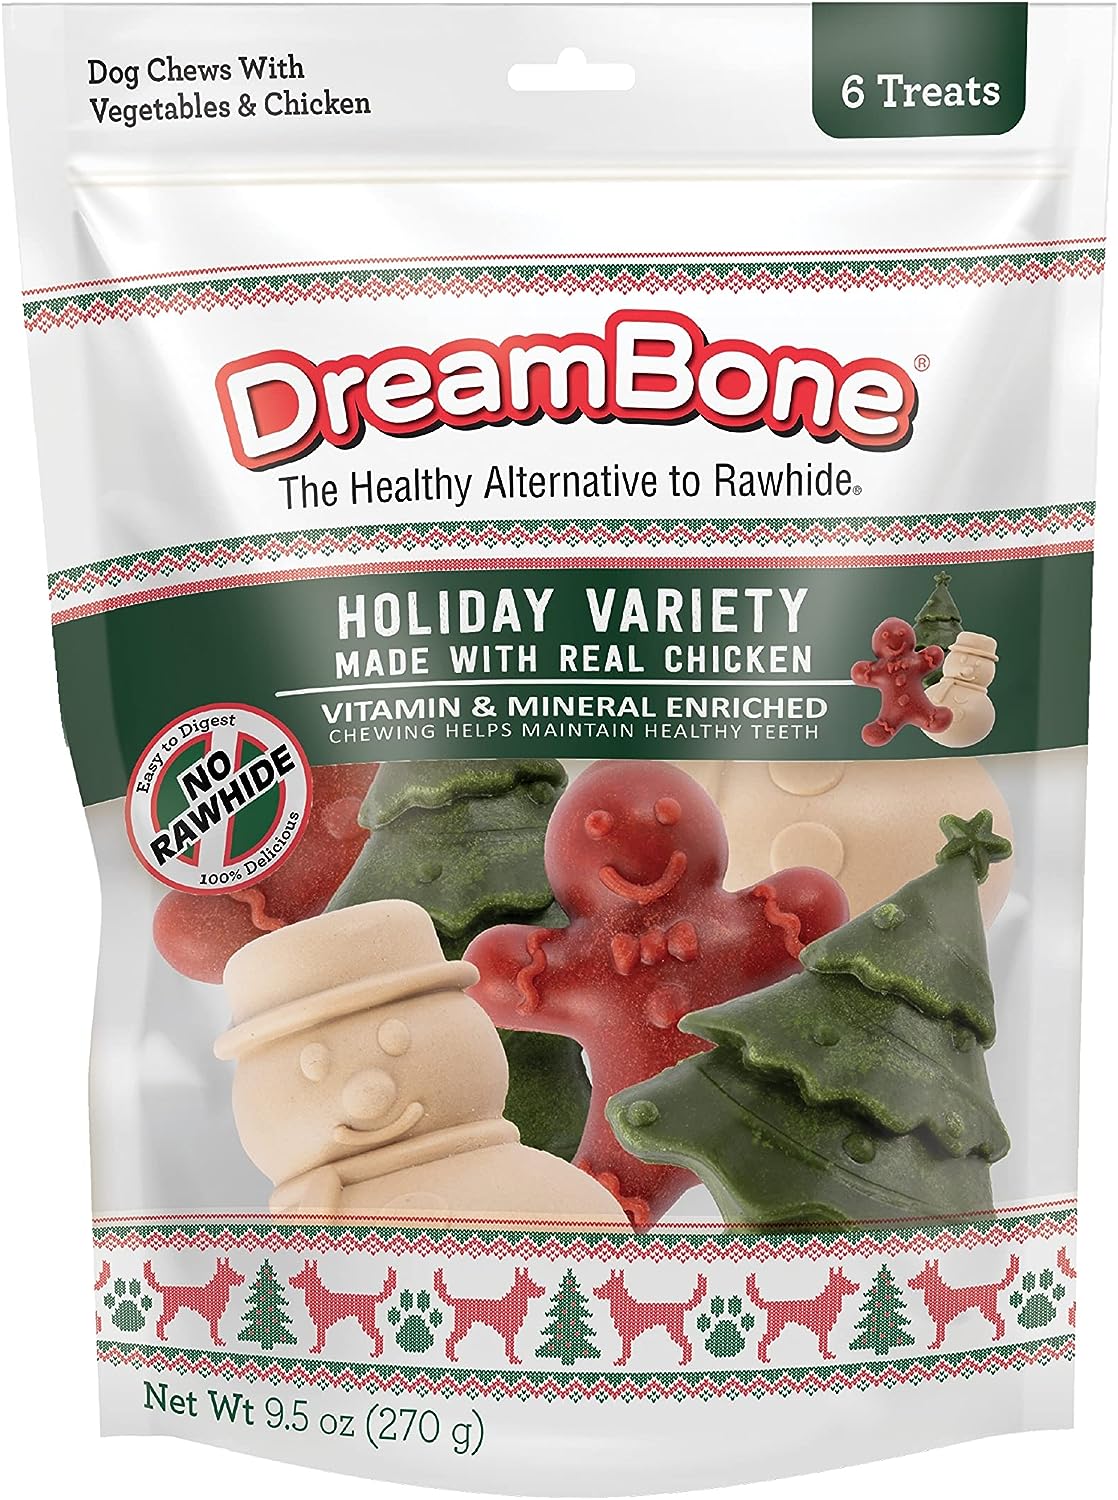 DreamBone Holiday Variety Vegetables and Chicken Dog Treats